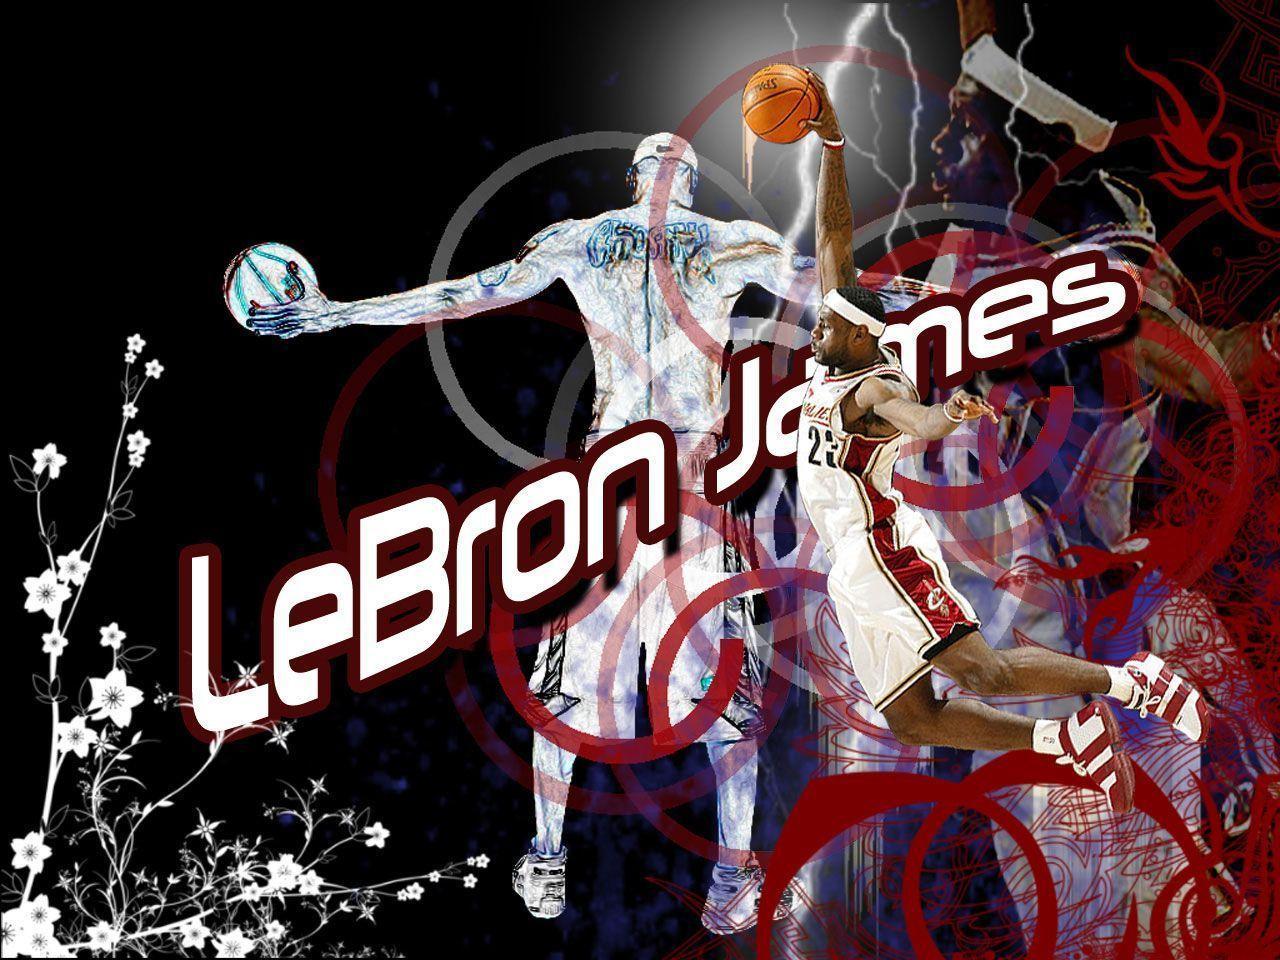 Wallpapers For > Lebron James Dunk Wallpapers 2013